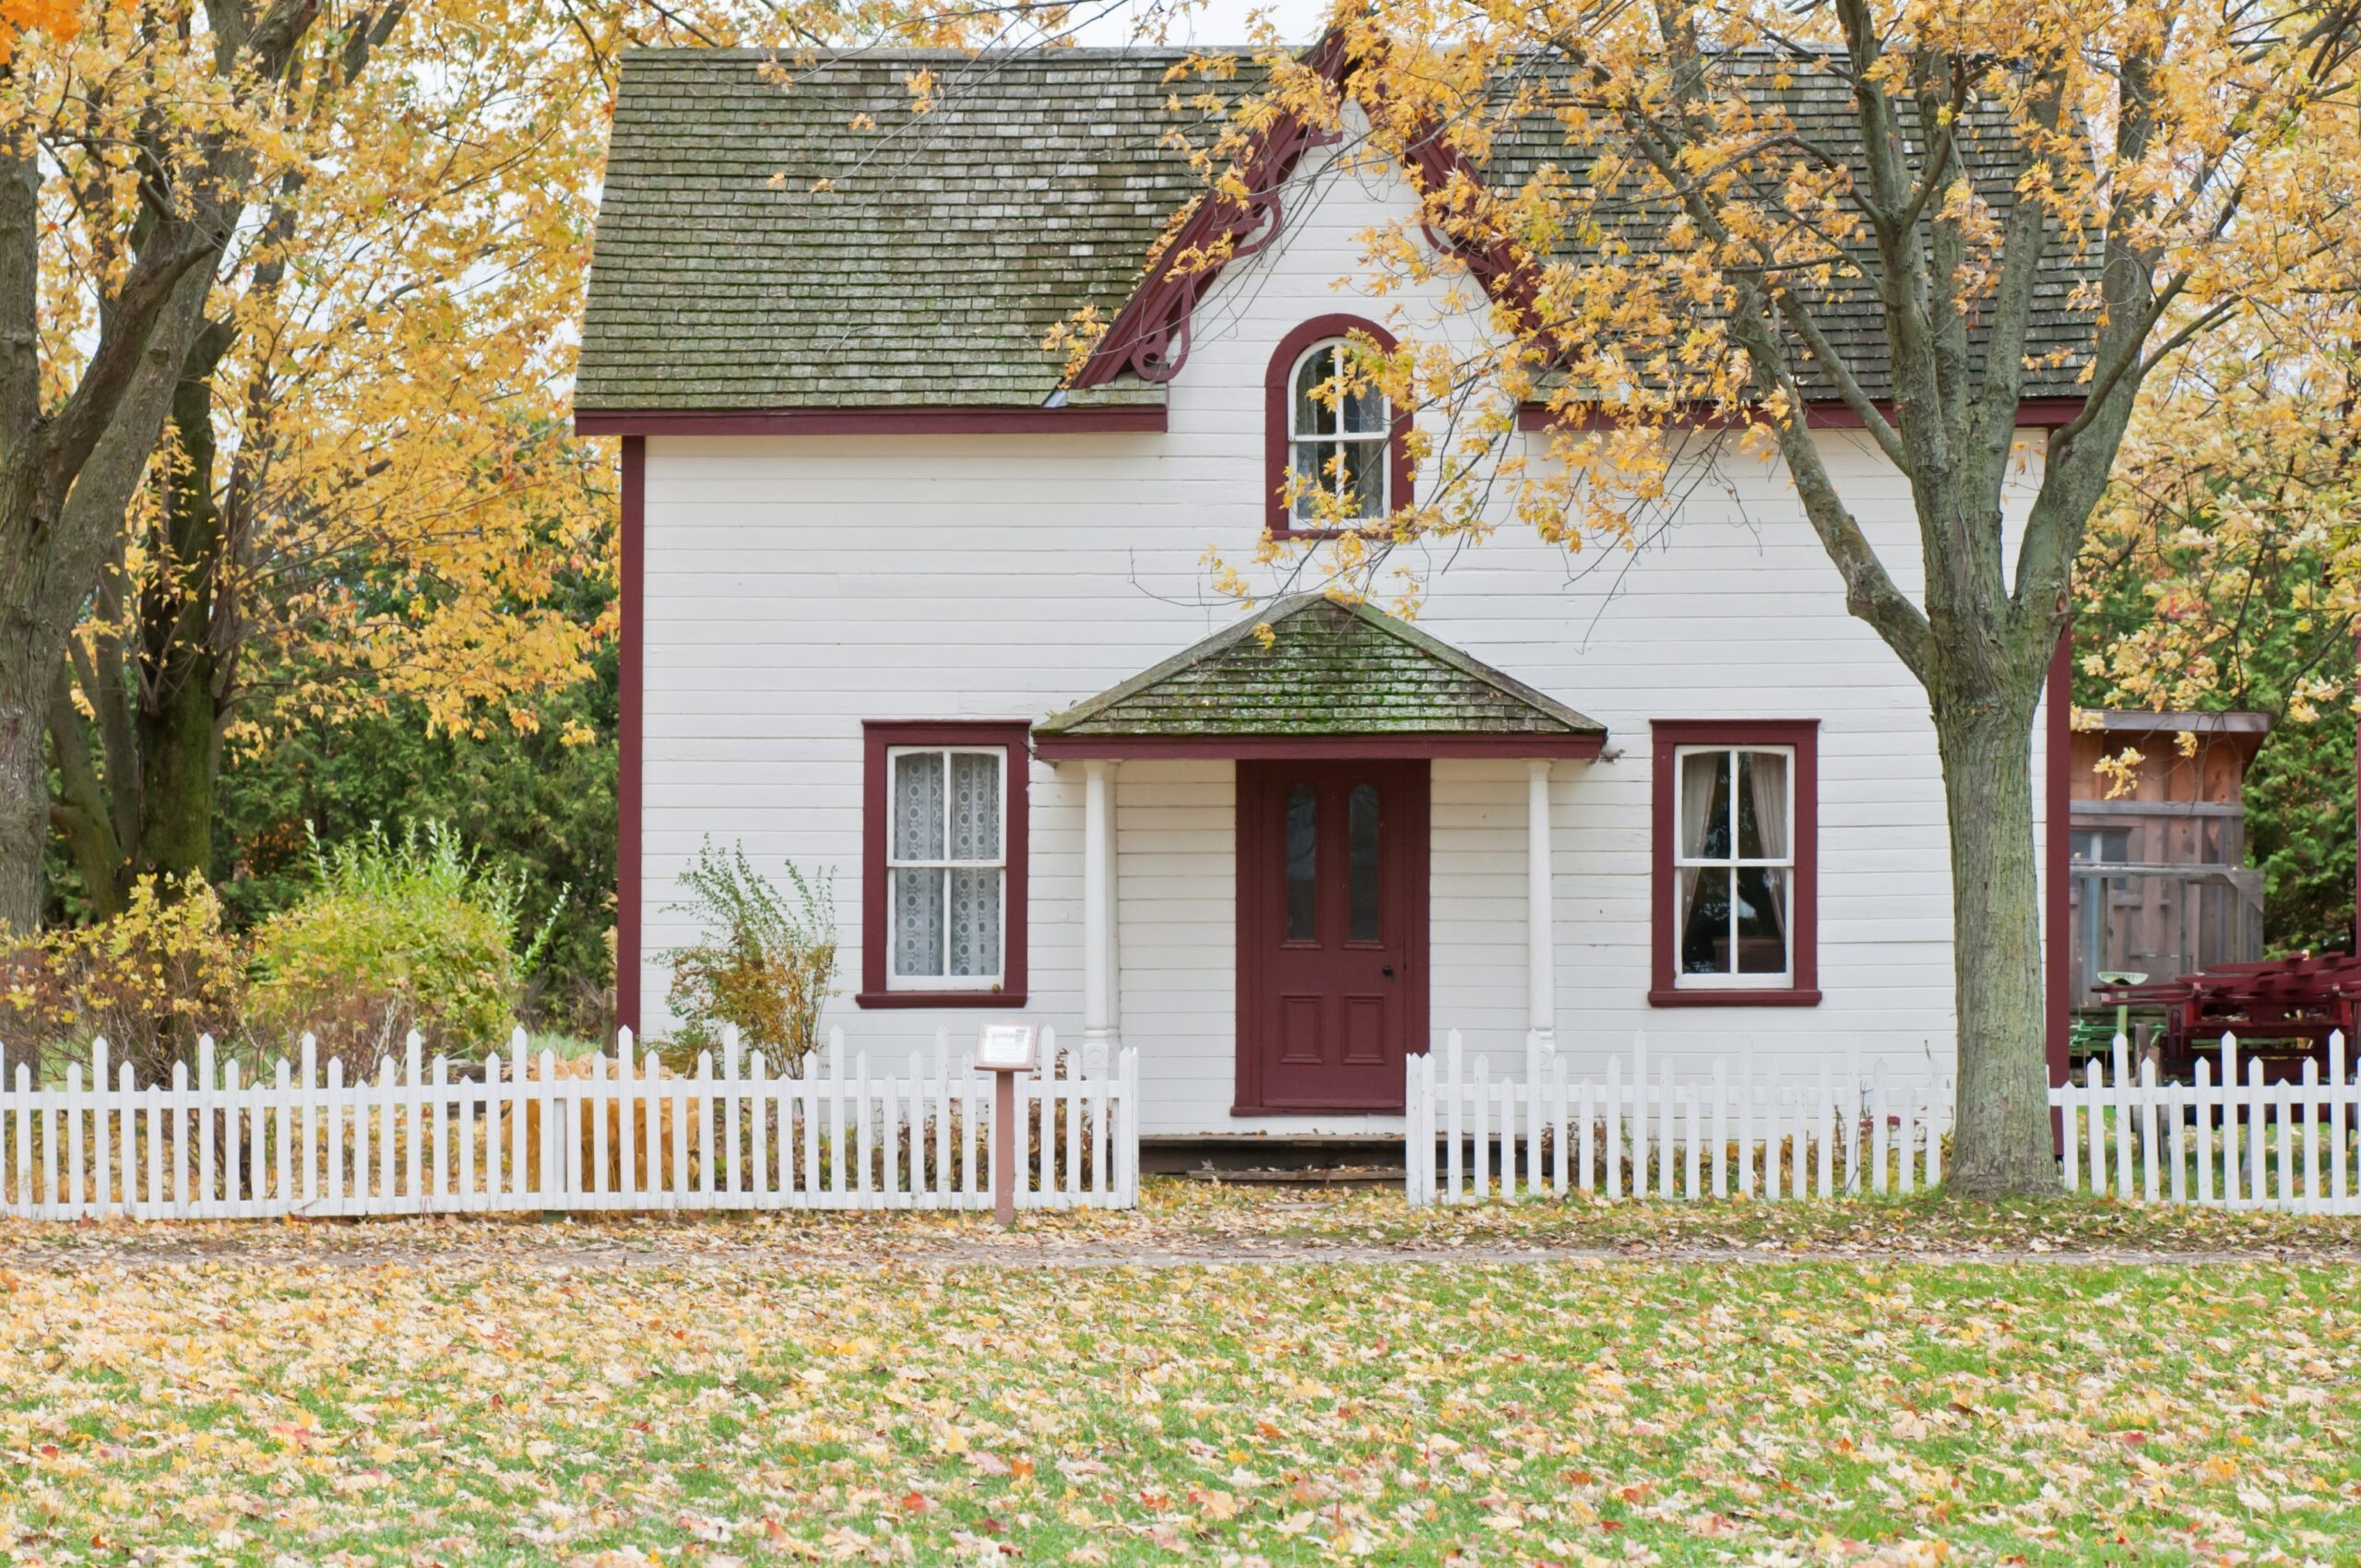 Cute house with white fence